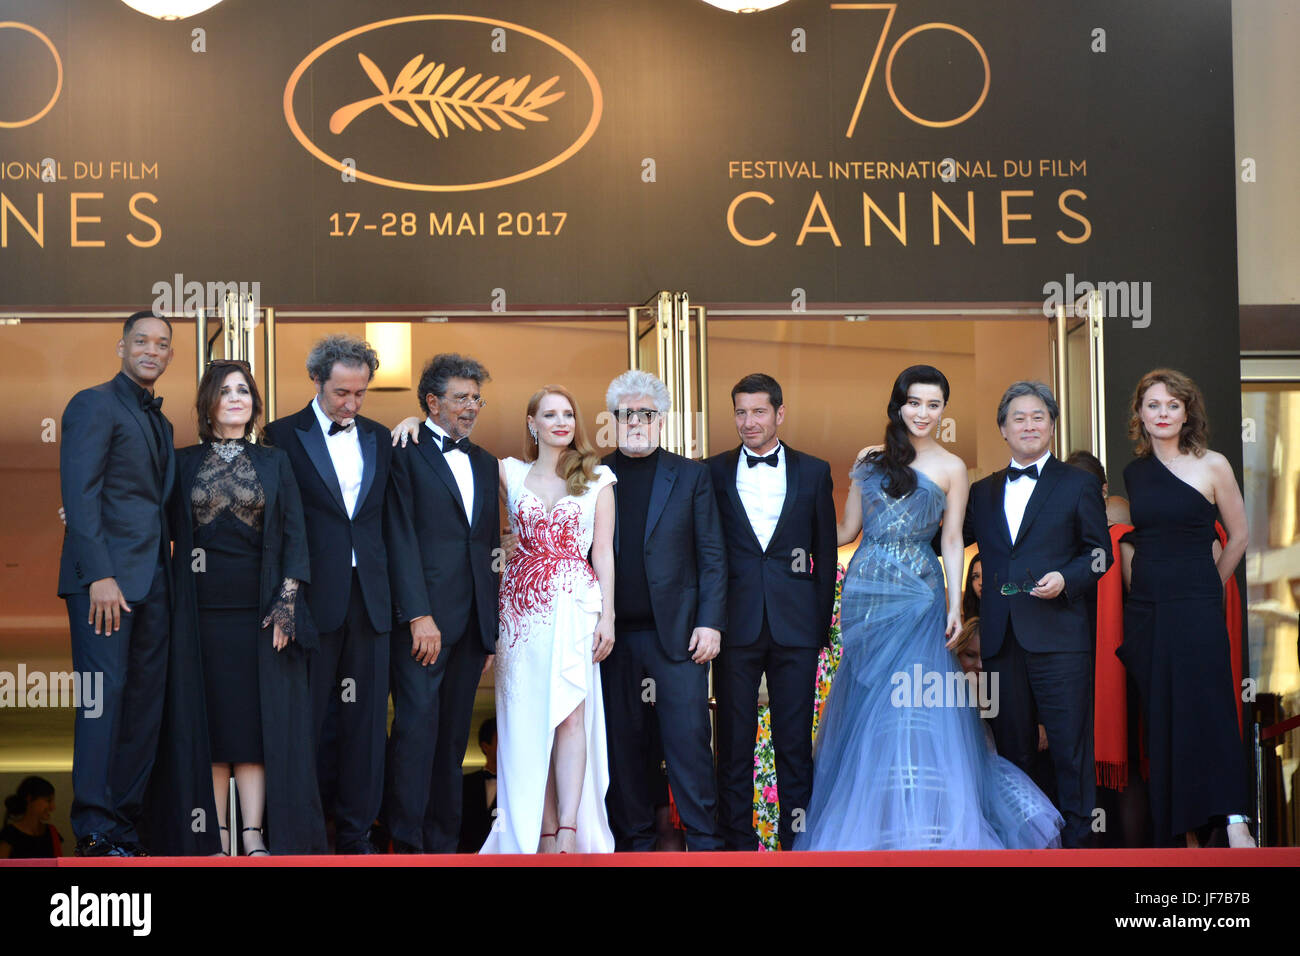 Closing Ceremony of the 70th annual Cannes Film Festival at the Palais des Festivals in Cannes, France.  Featuring: Will Smith, Agnes Jaoui, Paolo Sorrentino, Gabriel Yared, Jessica Chastain, Pedro Almodovar, David Lisnard, Fan Bingbing, Park Chan-wook, Maren Ade Where: Cannes, France When: 28 May 2017 Credit: IPA/WENN.com  **Only available for publication in UK, USA, Germany, Austria, Switzerland** Stock Photo